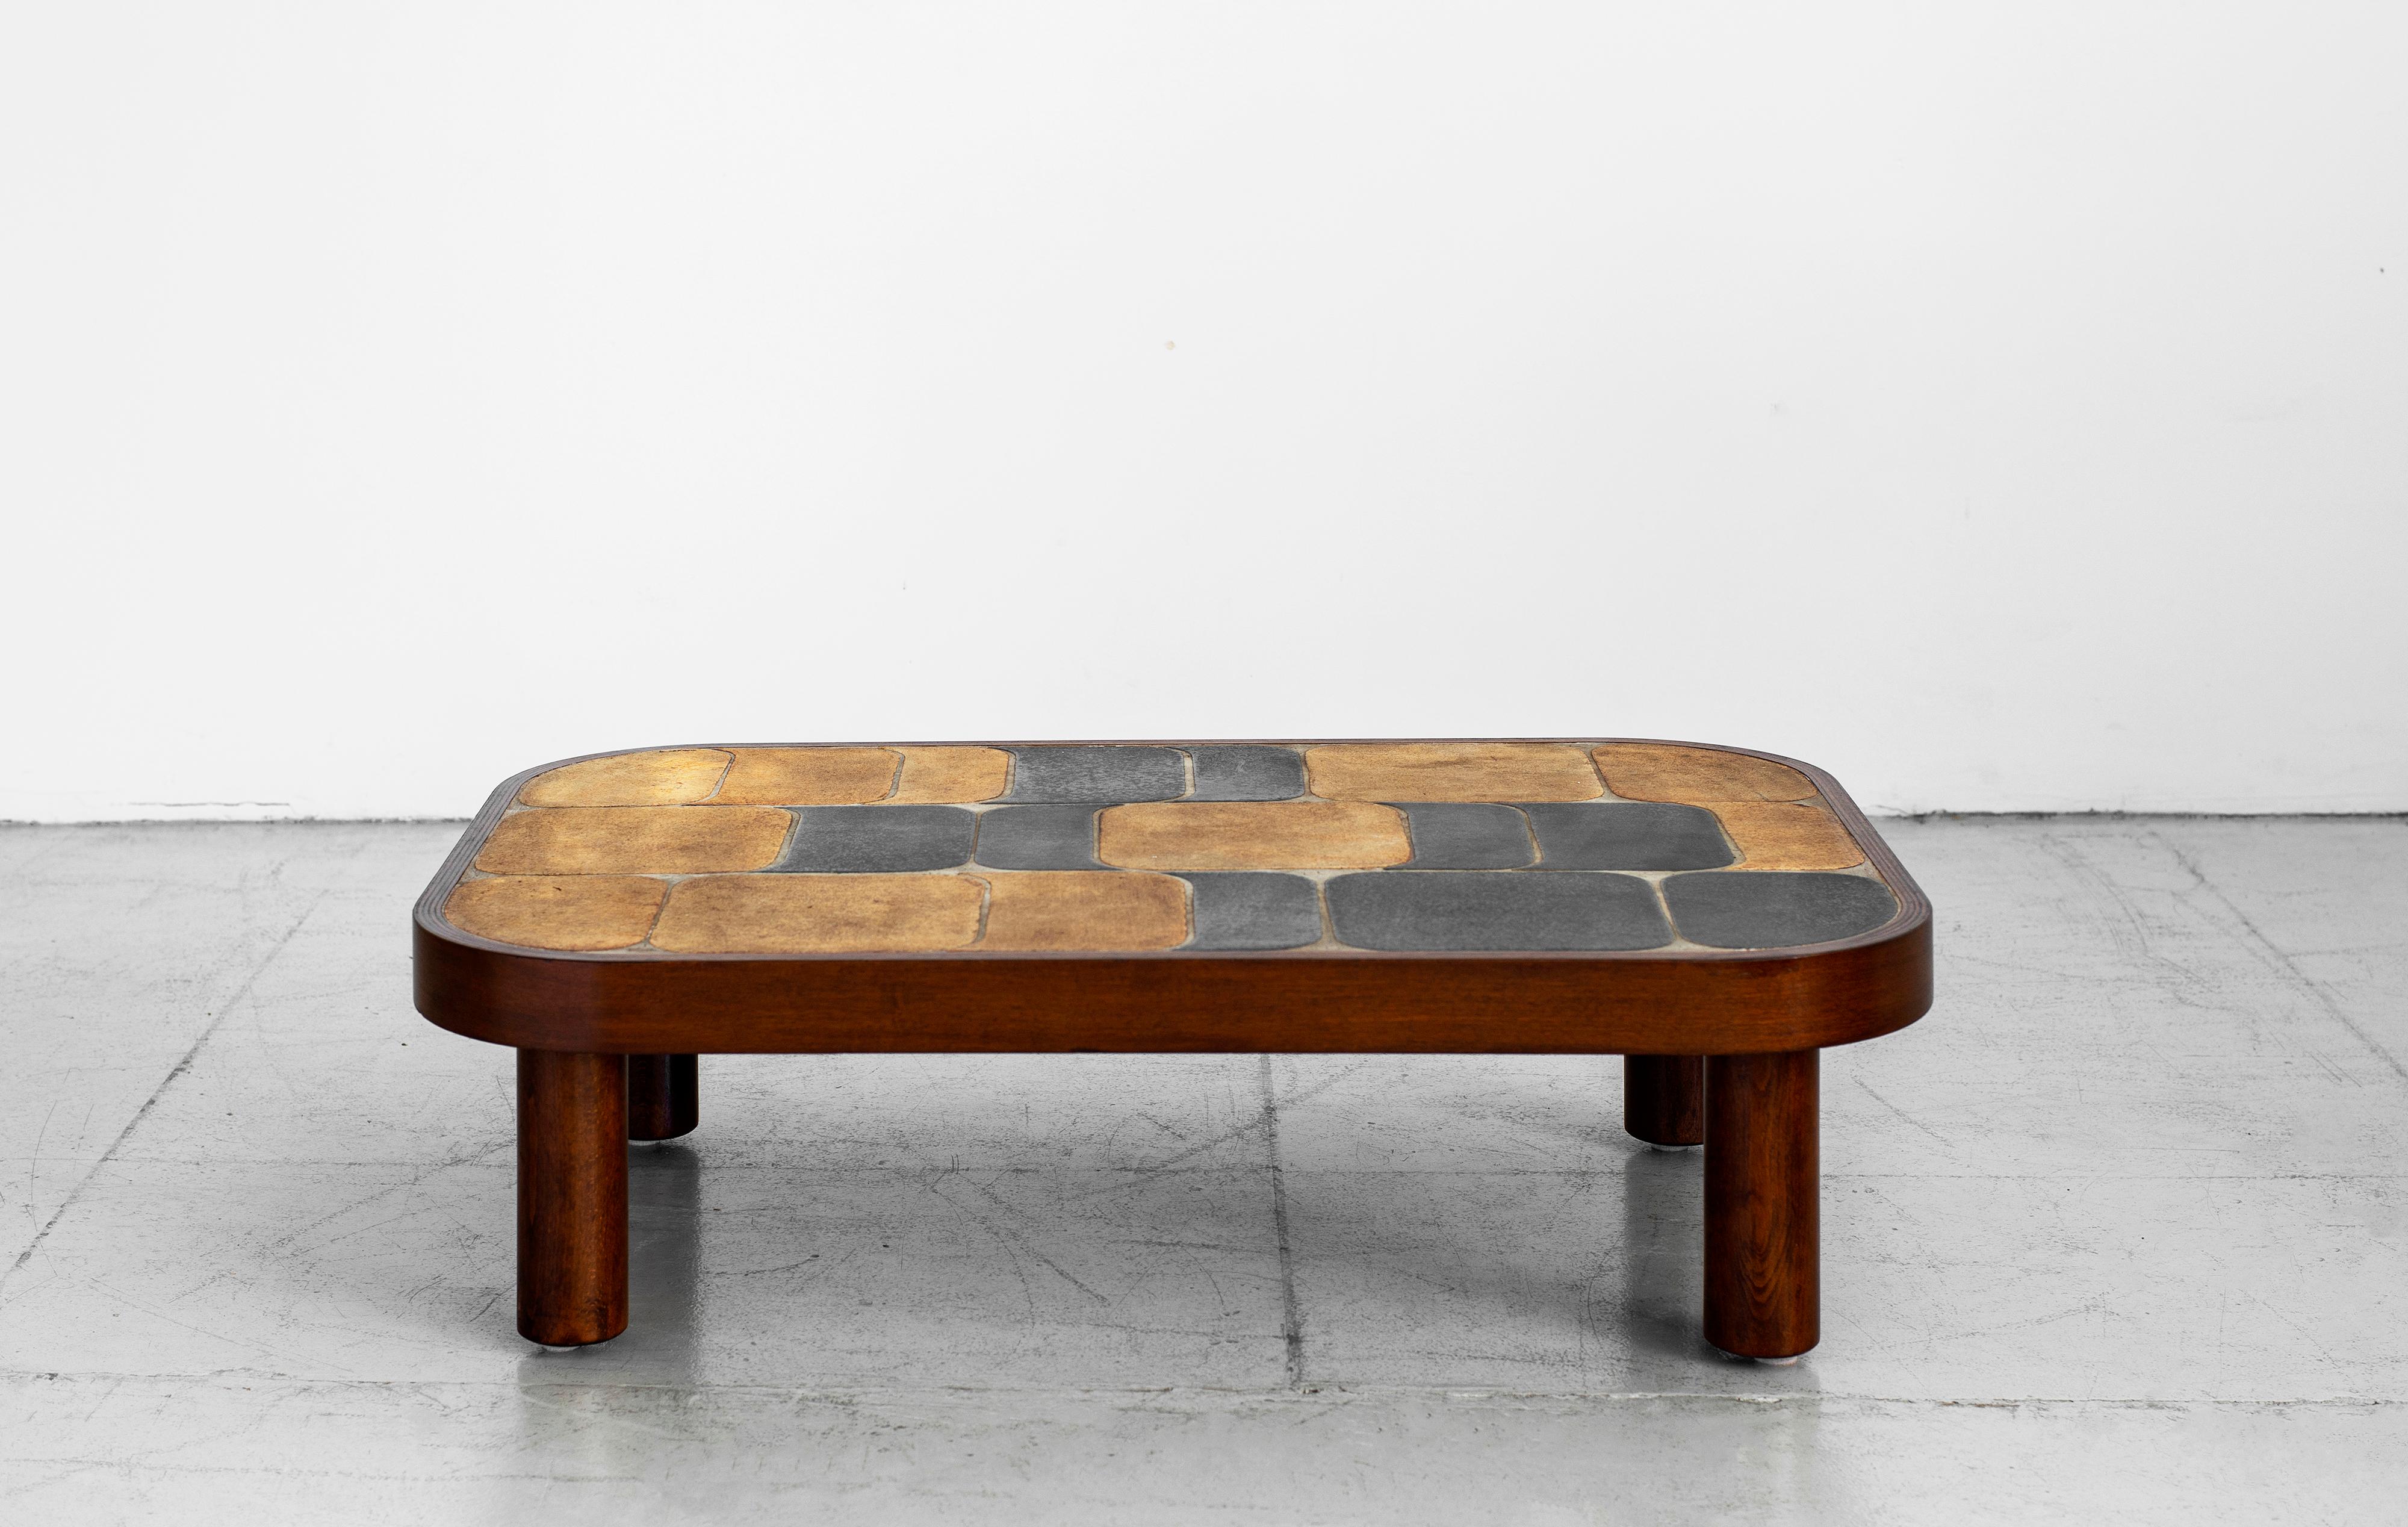 Wonderful ceramic tile top coffee table designed by Roger Capron (signed). 
Features his unique 